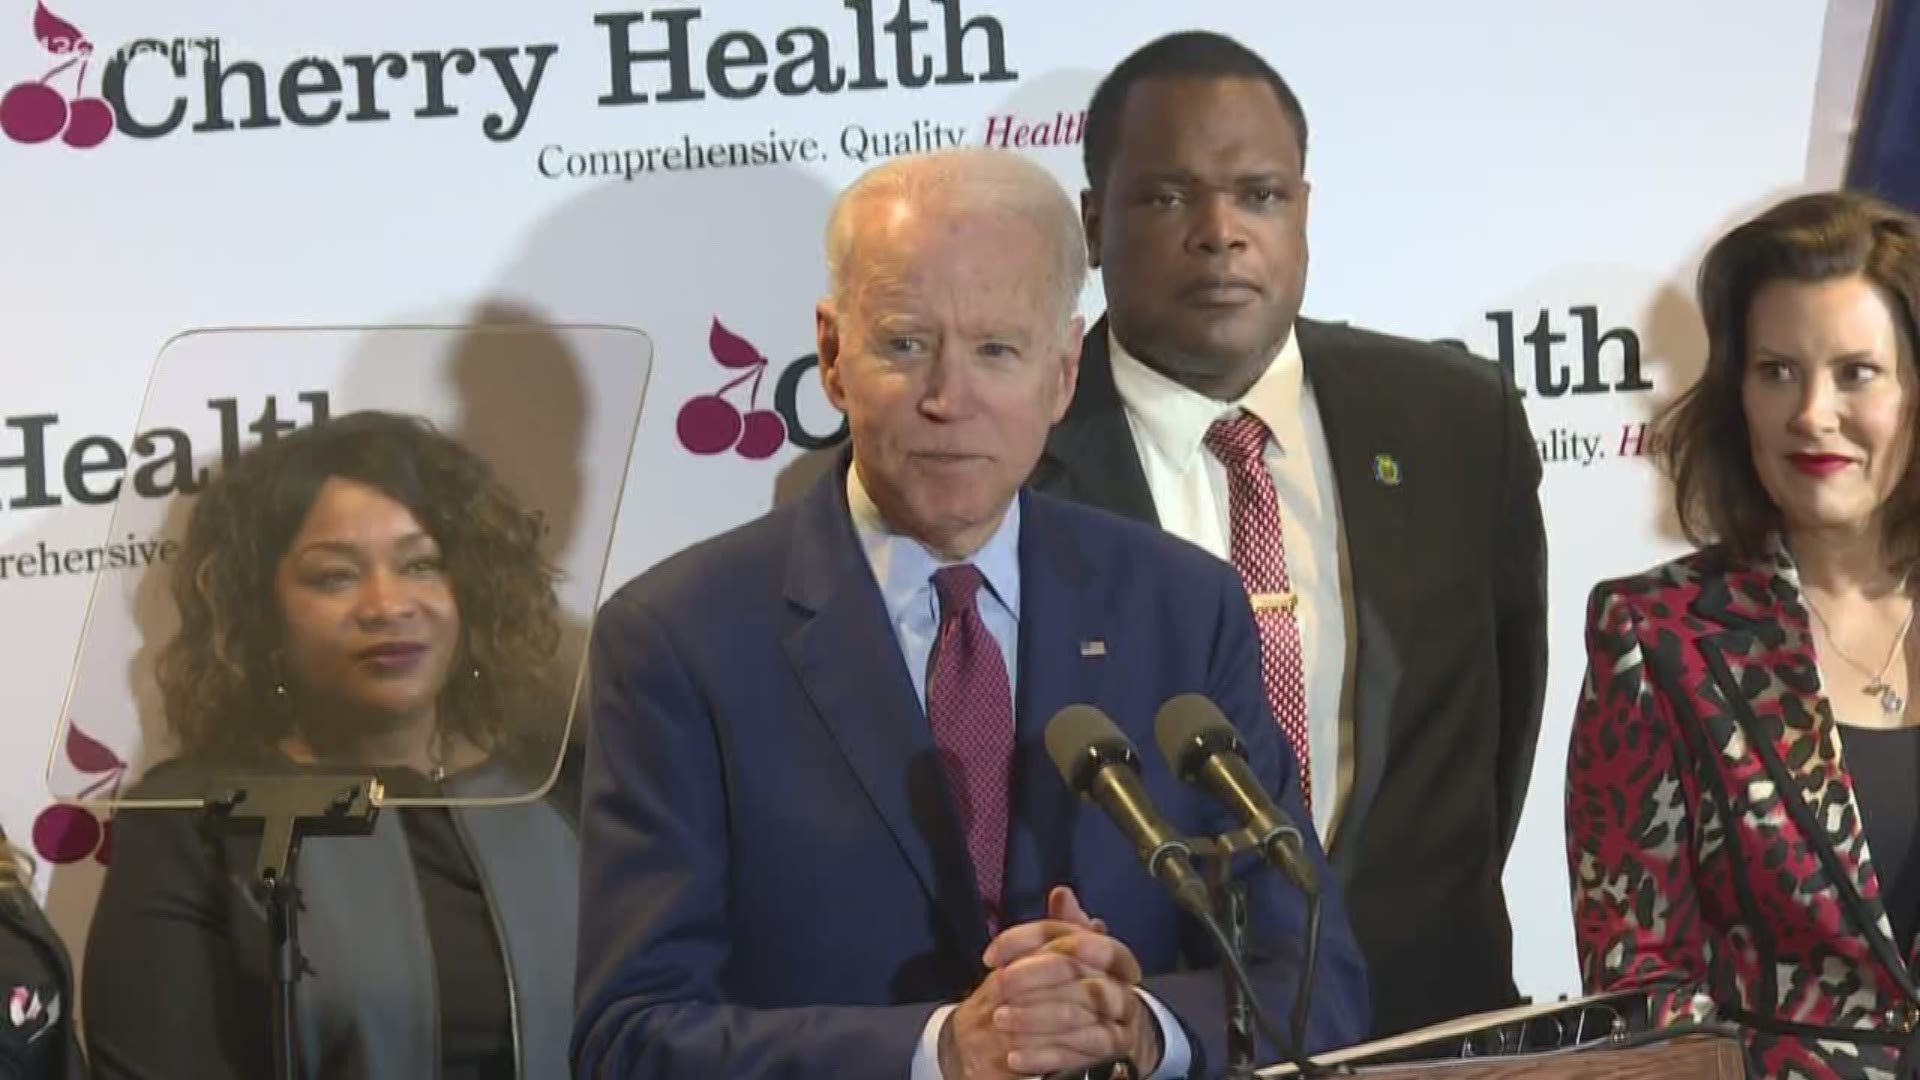 With less than 24 hours before Michiganders vote in the presidential primary, Joe Biden was in Grand Rapids talking about healthcare.